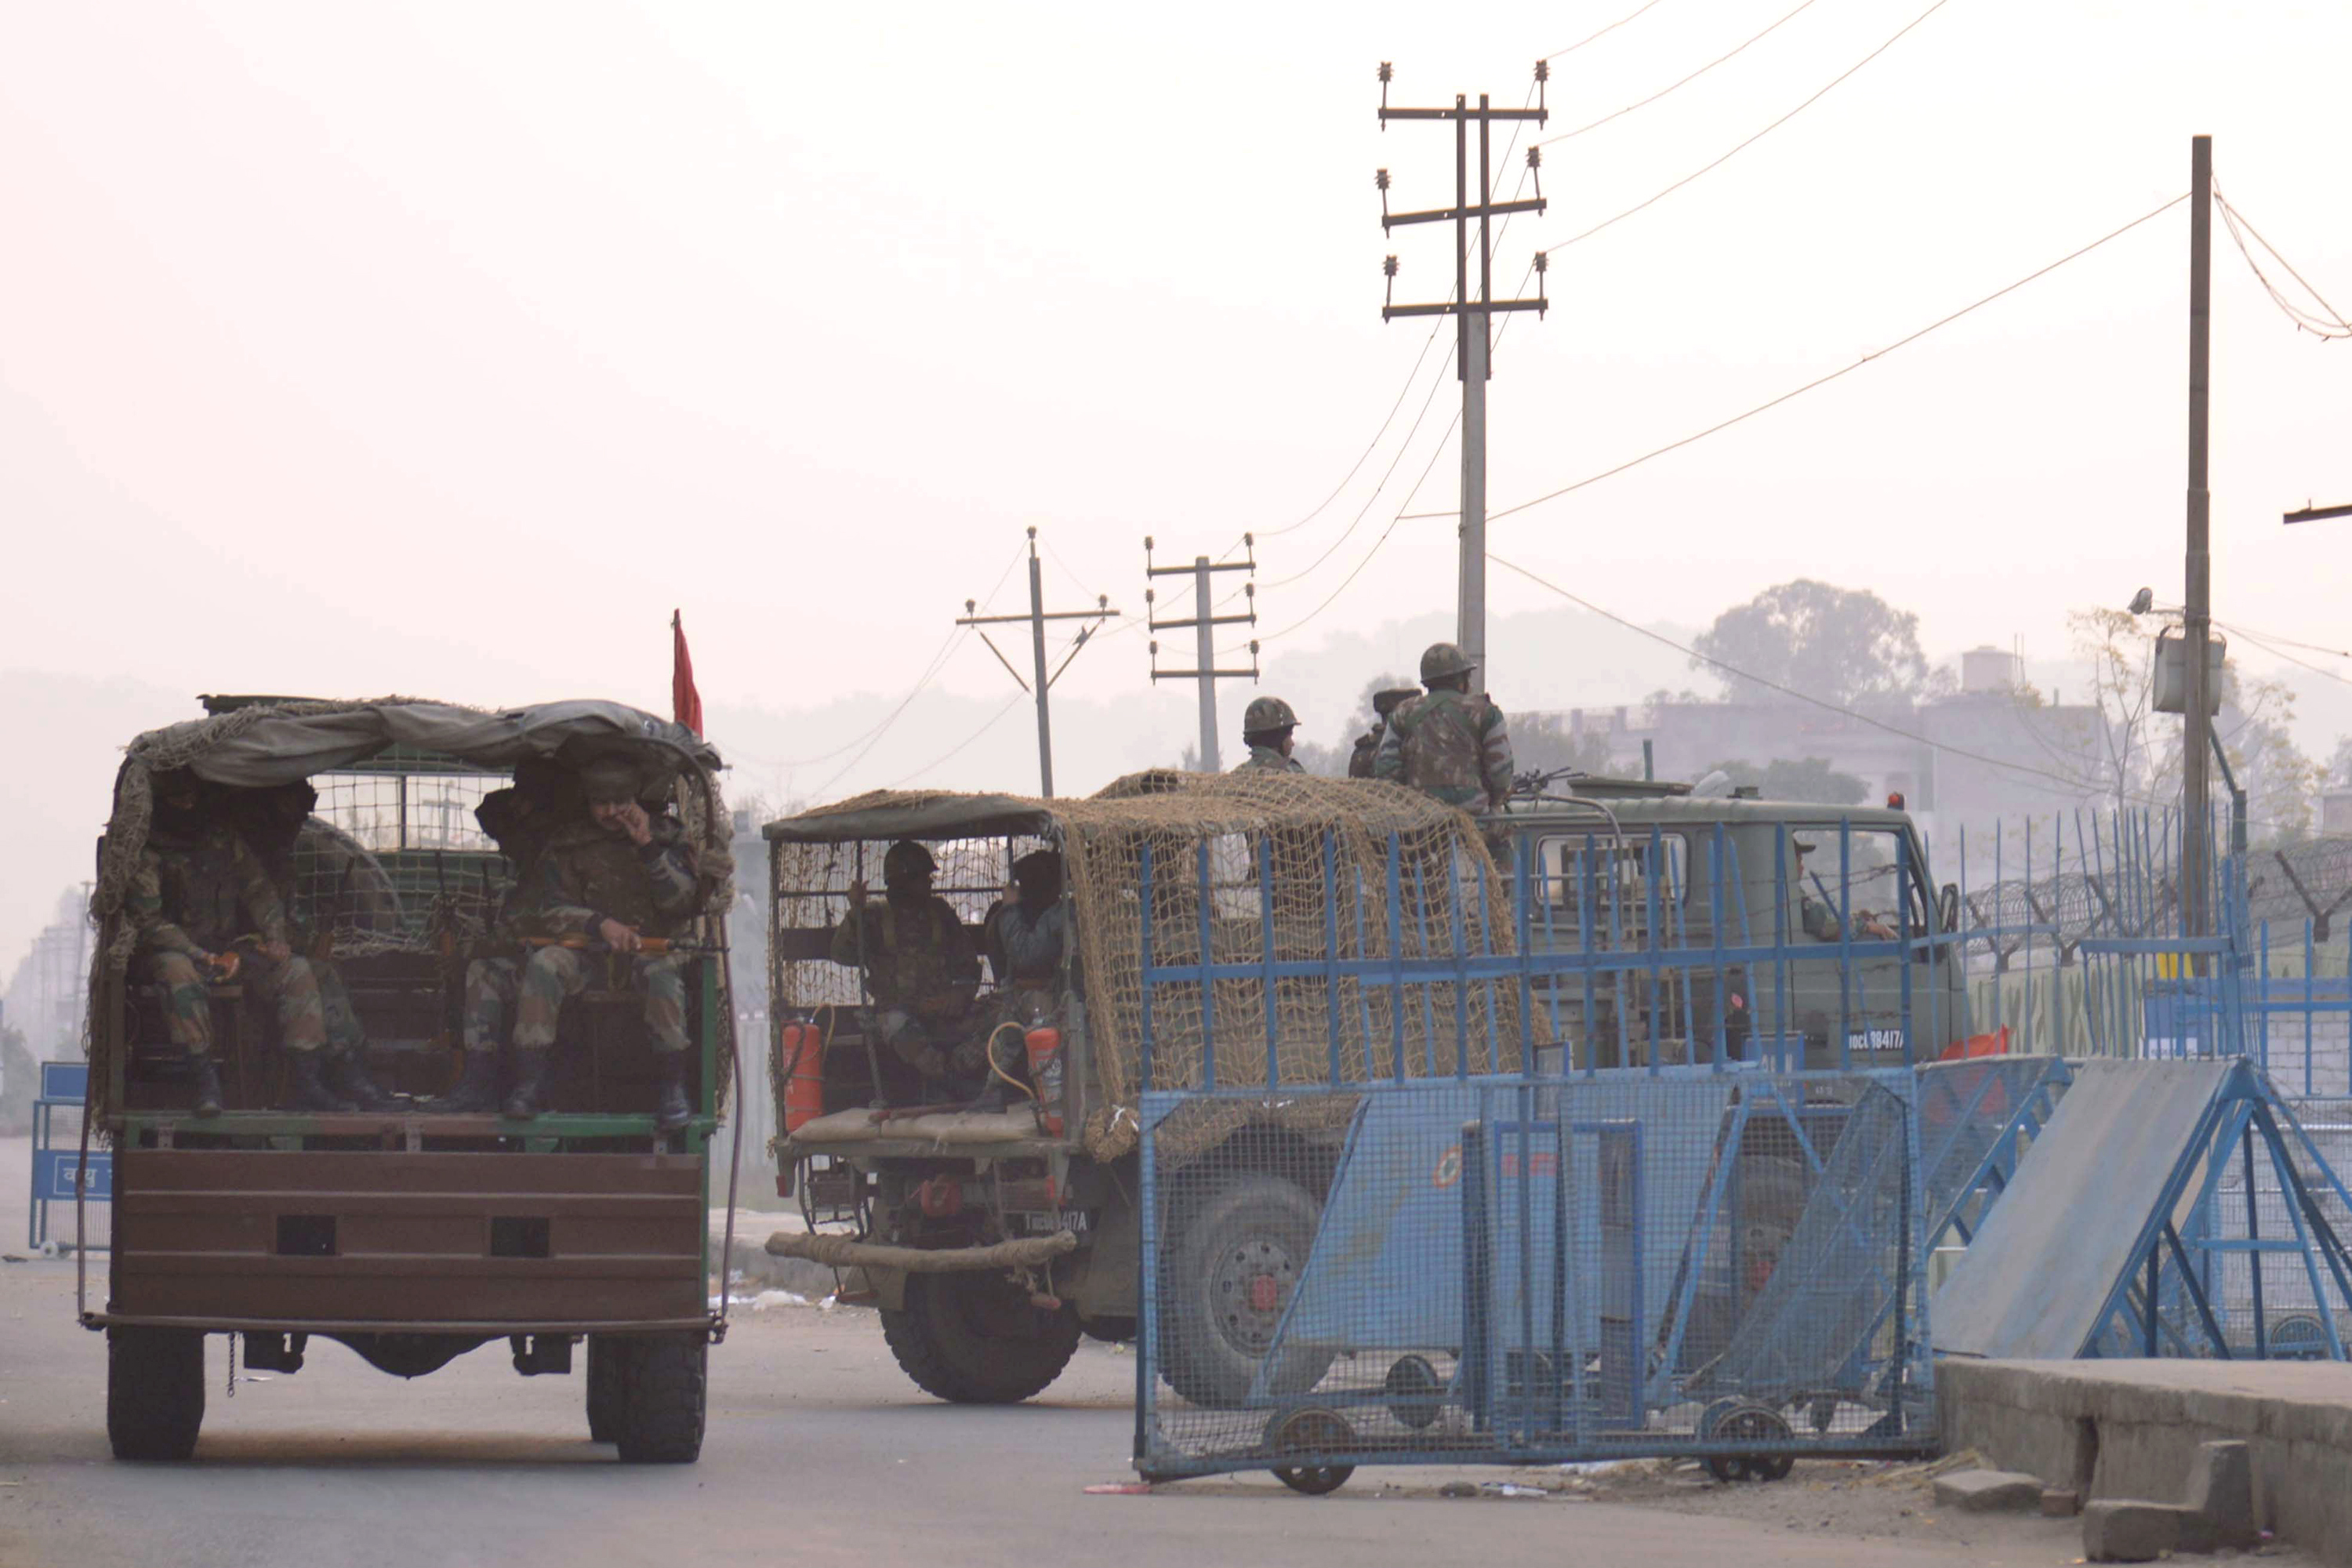 Indian army trucks transport troops to the air-force base in Pathankot on Jan. 4, 2016, after a weekend of fierce fighting with suspected Islamic insurgents, in which seven soldiers and five attackers were killed (Narinder Nanu—AFP/Getty Images)